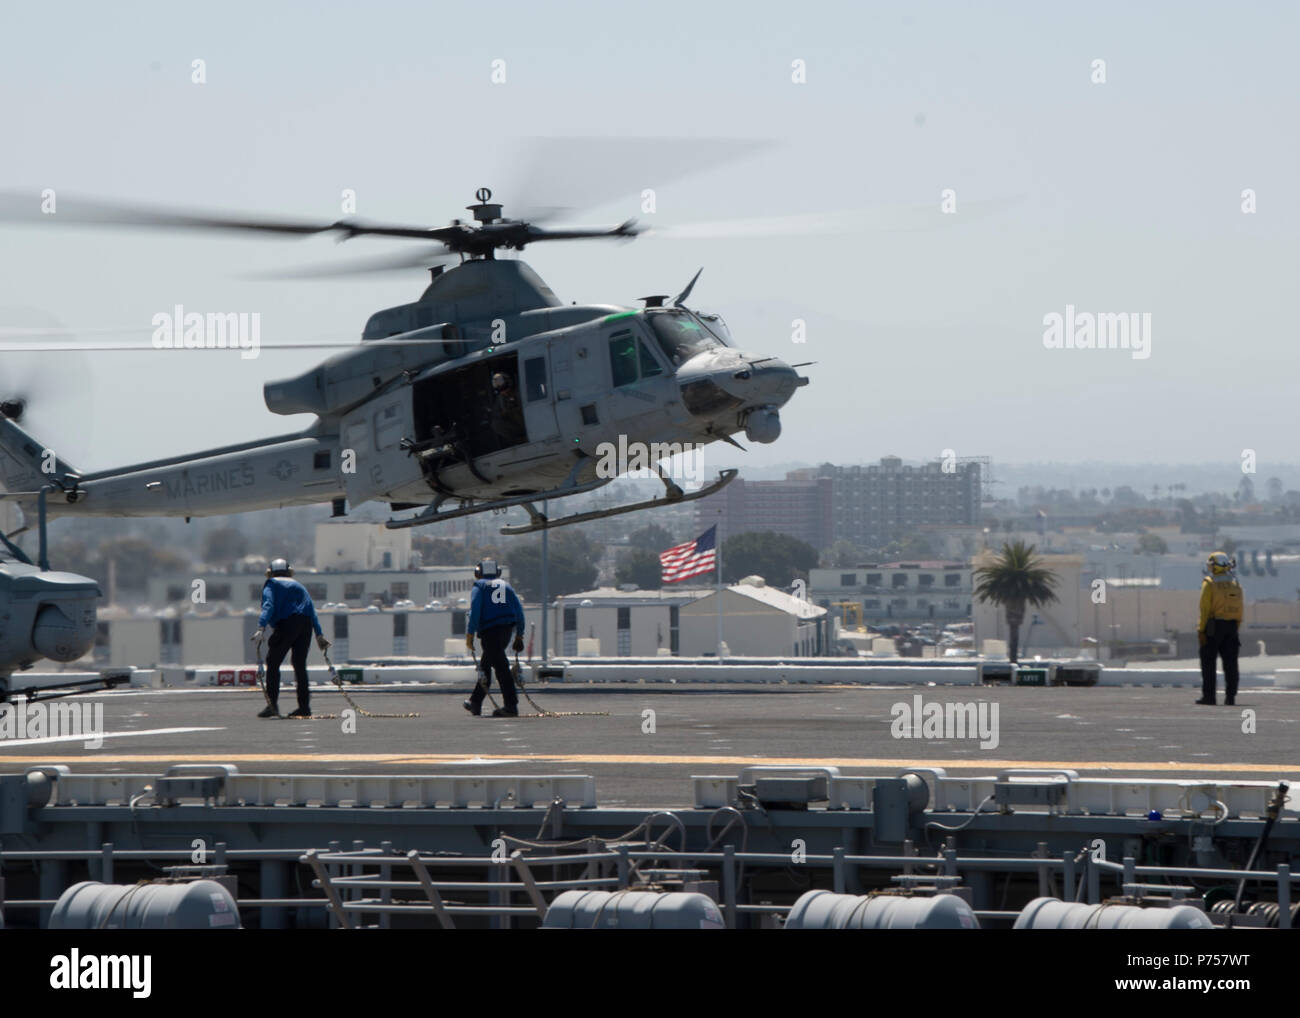 180628-N-XK809-233 United States (June 28, 2018) An AH-1Z Viper, assigned to Marine Light Attack Helicopter Squadron (HMLA) 367, lands on the flight deck of the amphibious assault ship USS Bonhomme Richard (LHD 6) during the squadron embarkation. Bonhomme Richard is currently in its homeport of San Diego, preparing for an upcoming scheduled deployment. (U.S. Navy photo by Mass Communication Specialist 2nd Class William Sykes) Stock Photo